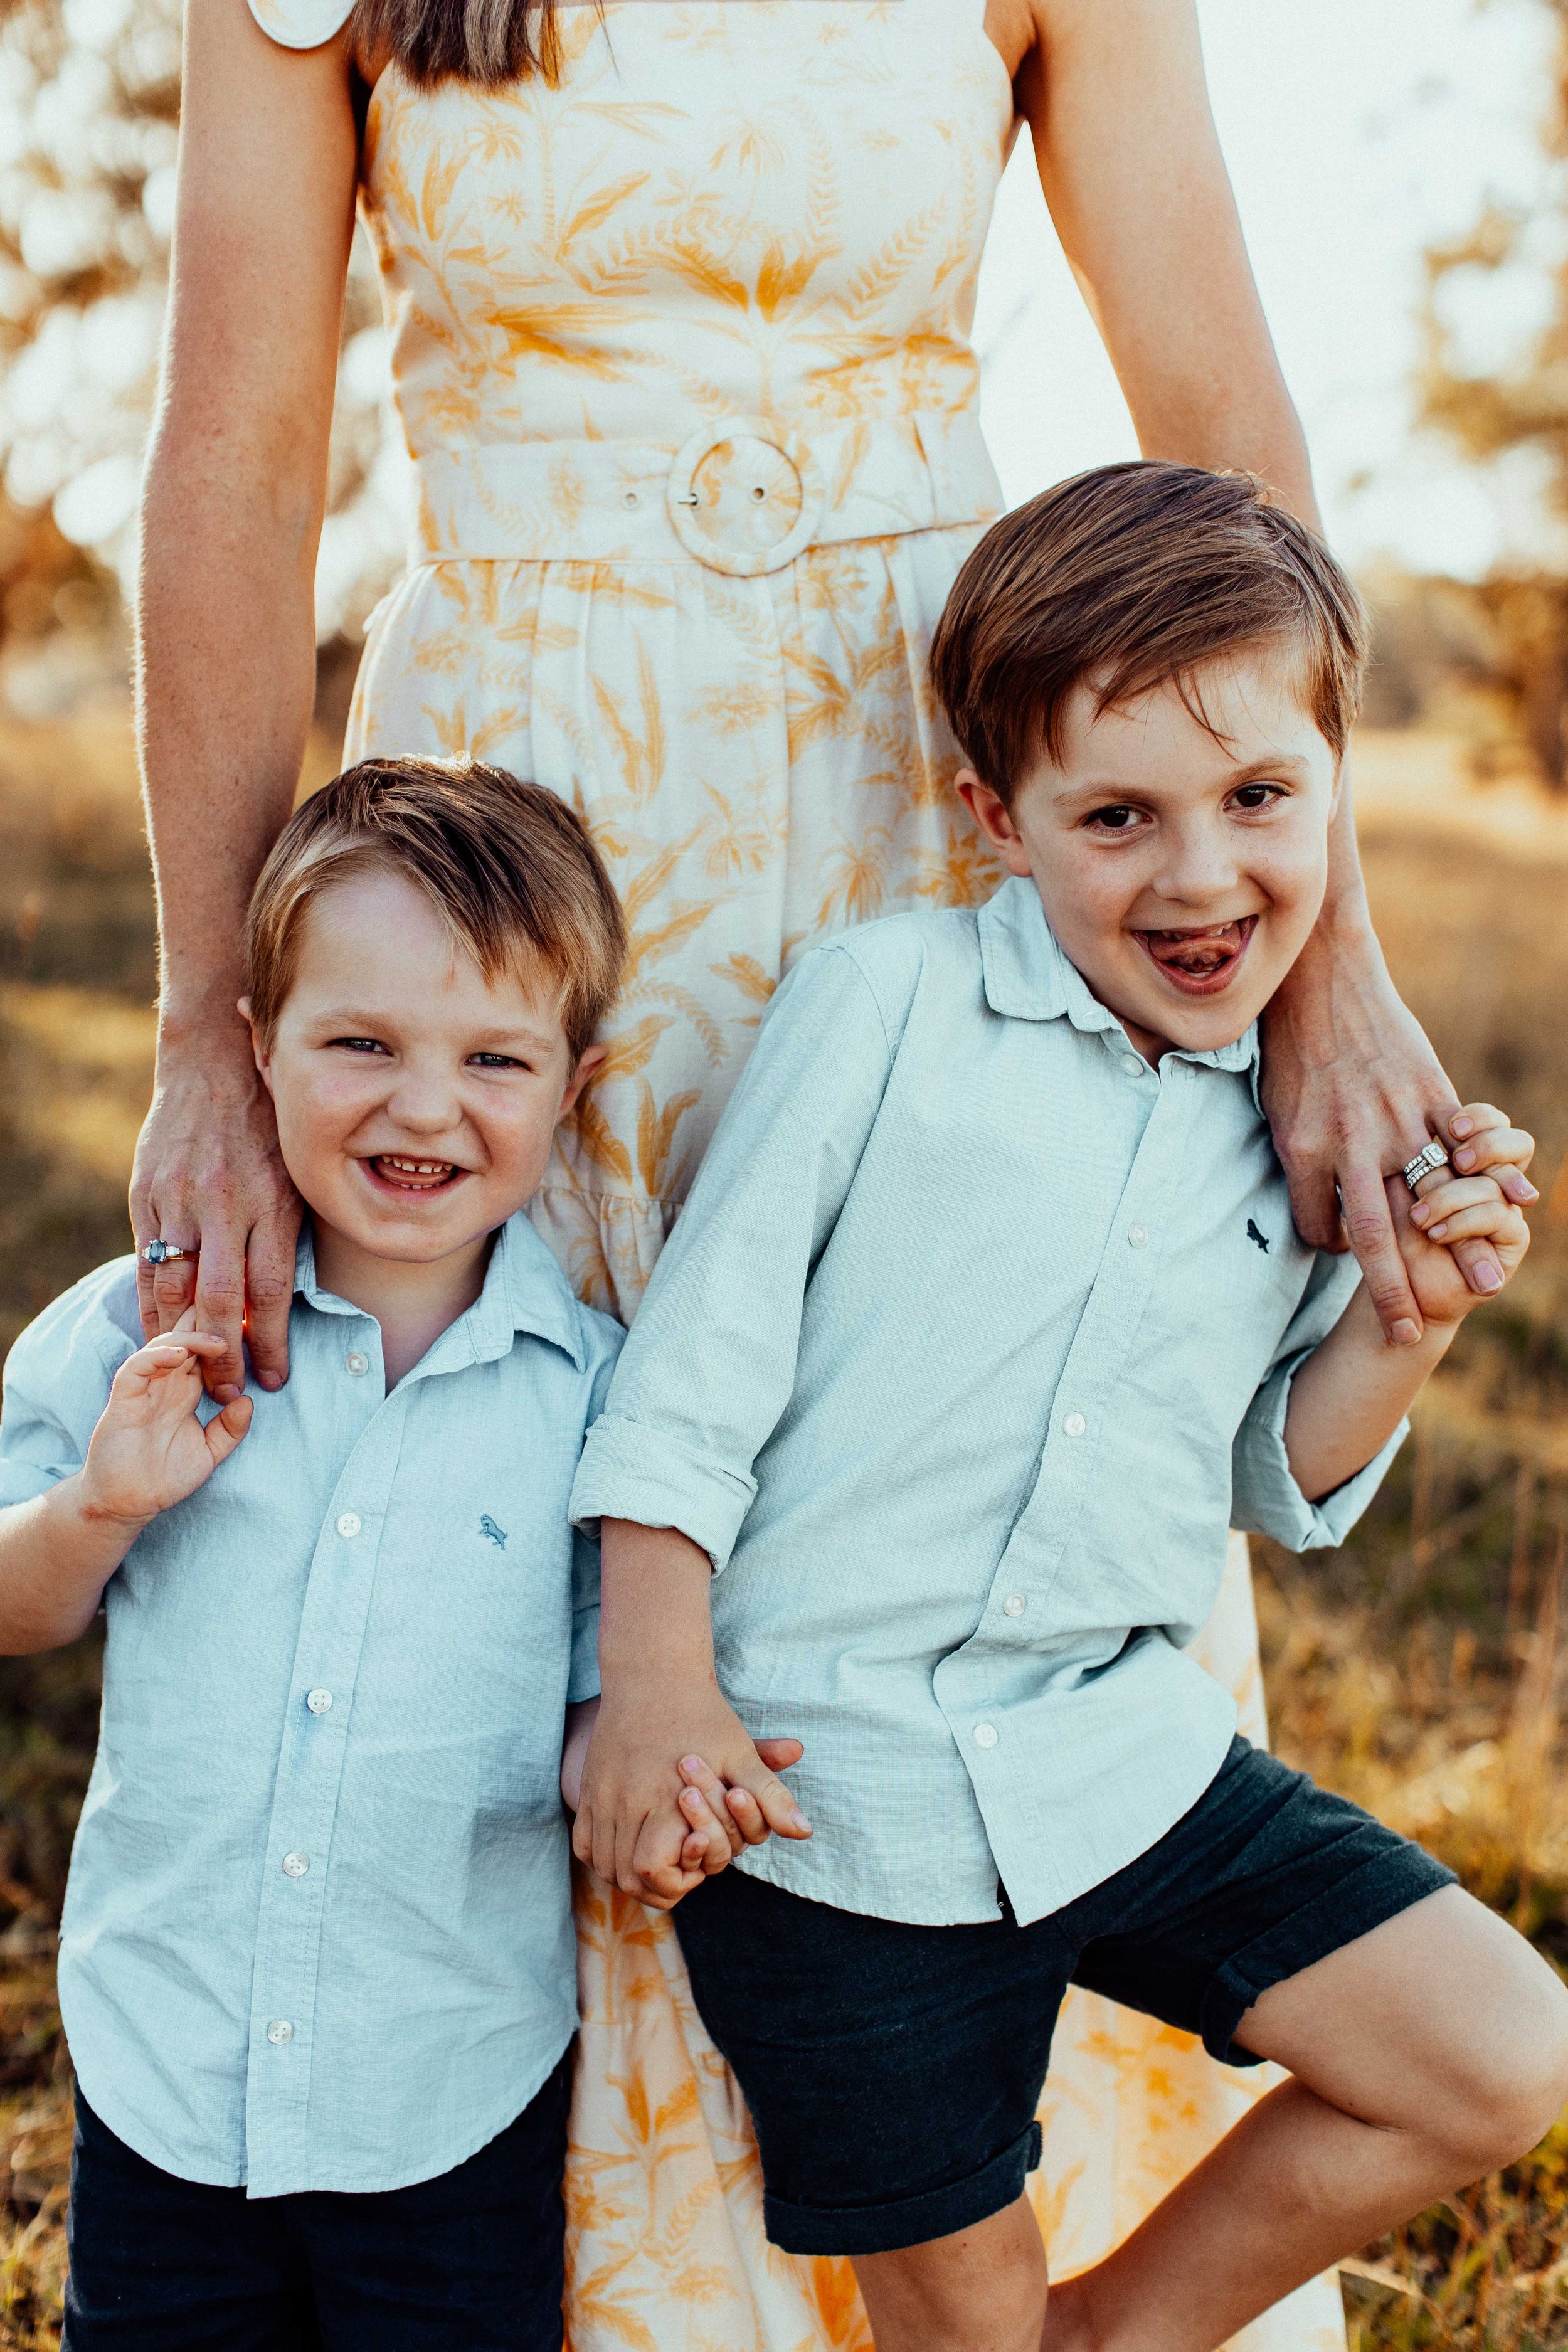 durney-family-exeter-southern-highlands-bowral-inhome-family-lifestyle-wollondilly-camden-macarthur-sydney-photography-www.emilyobrienphotography.net-3.jpg